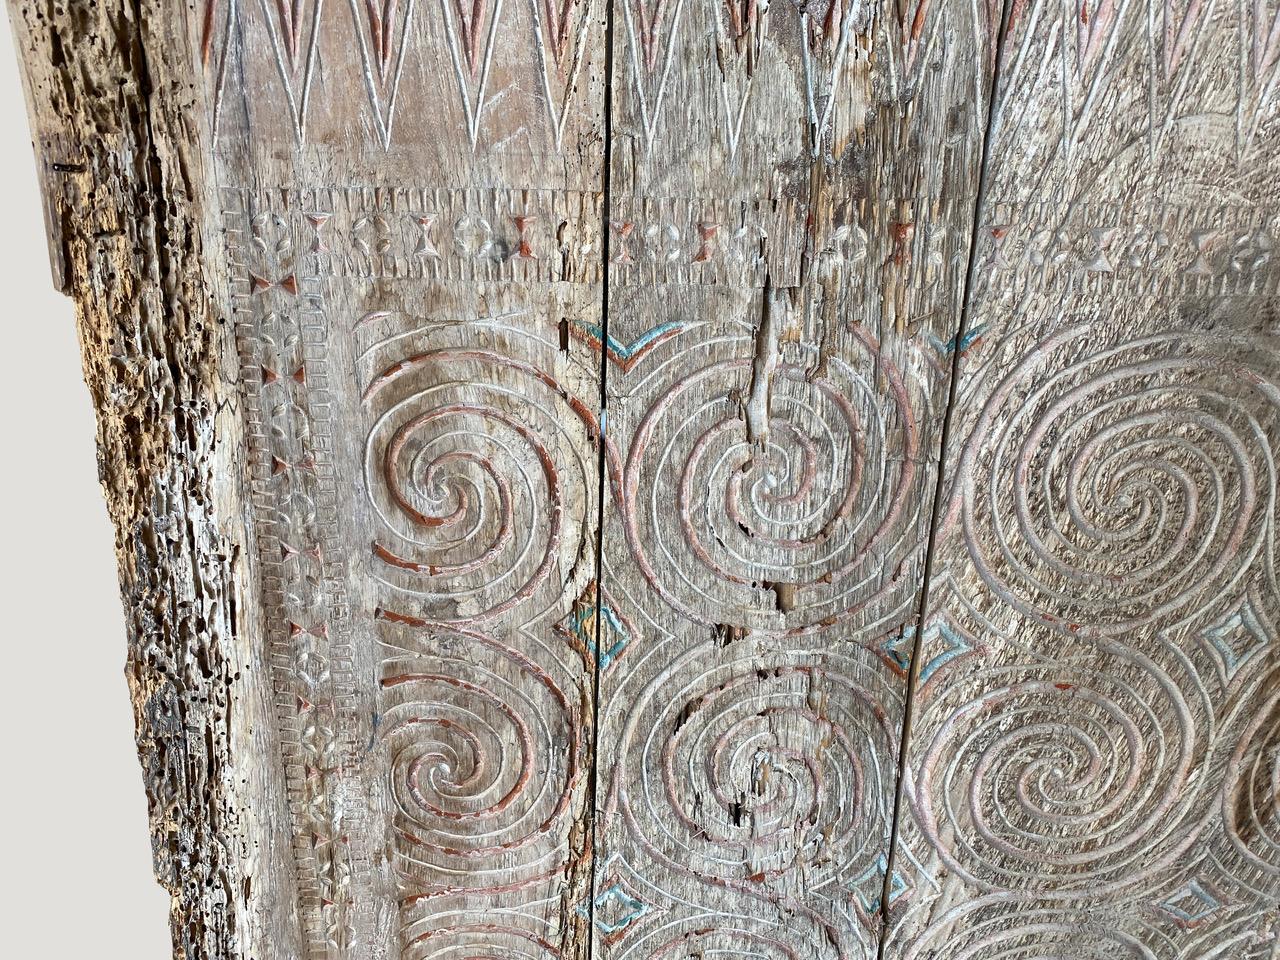 Beautiful hand carved ancient panel from Toraja, Sulawesi. Symbolizes peace and happiness.

This ancient carving was sourced in the spirit of wabi-sabi, a Japanese philosophy that beauty can be found in imperfection and impermanence. It is a